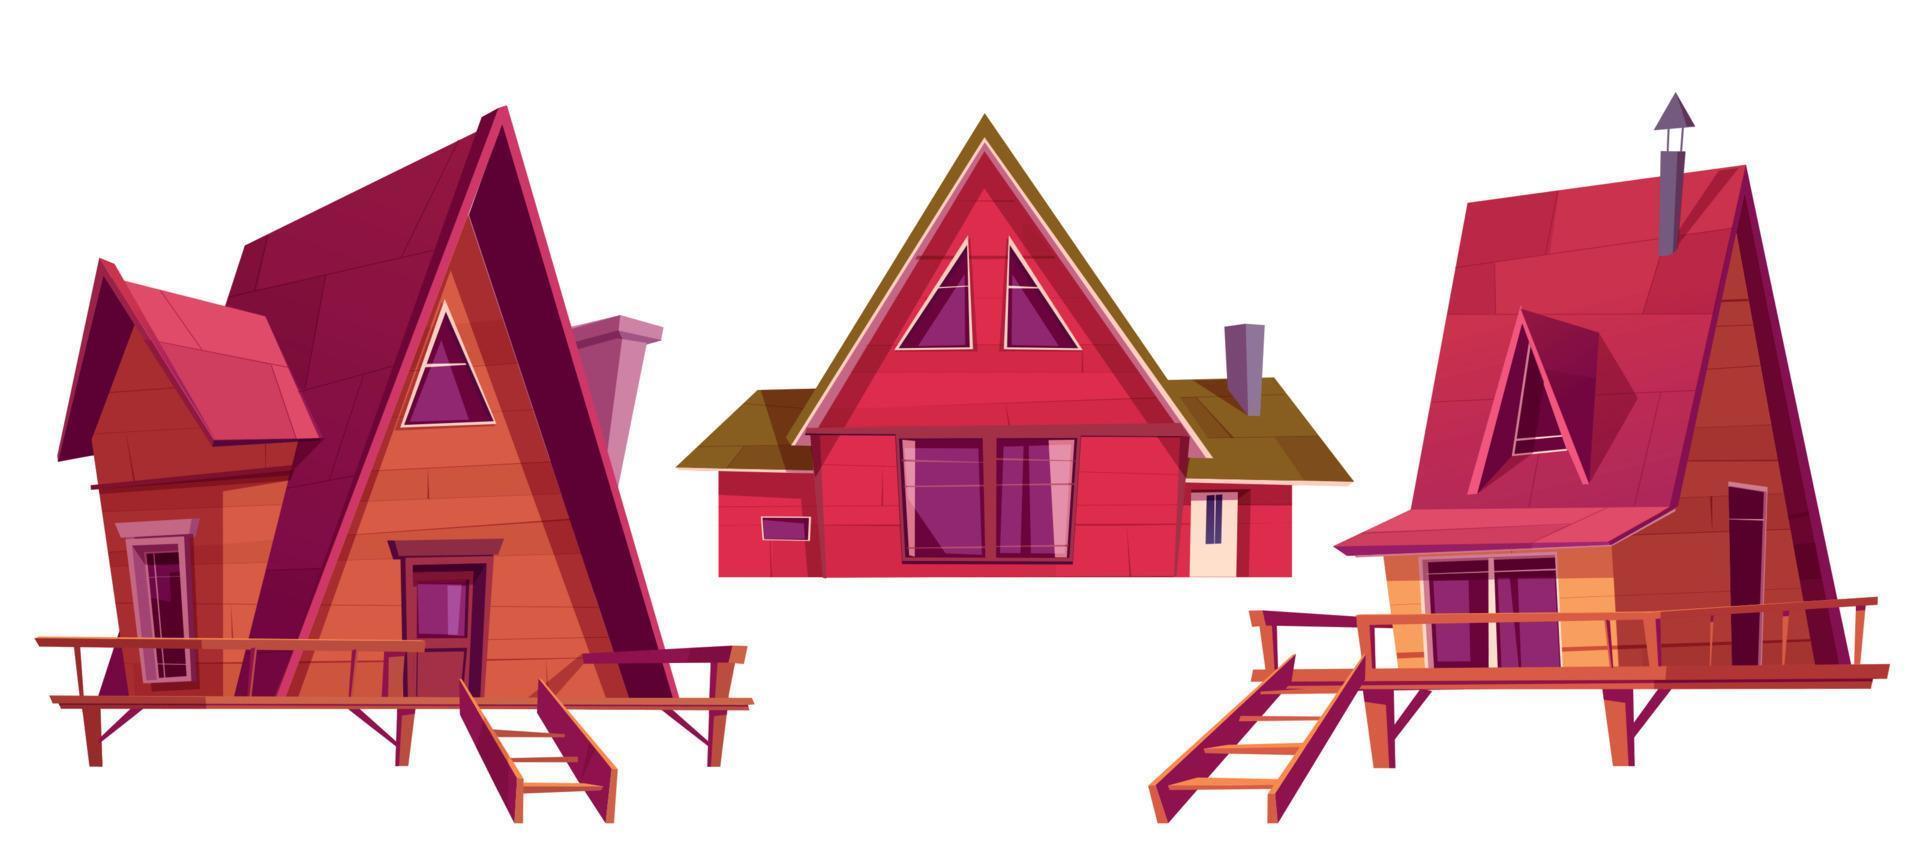 Winter houses, wooden chalet for mountain village vector